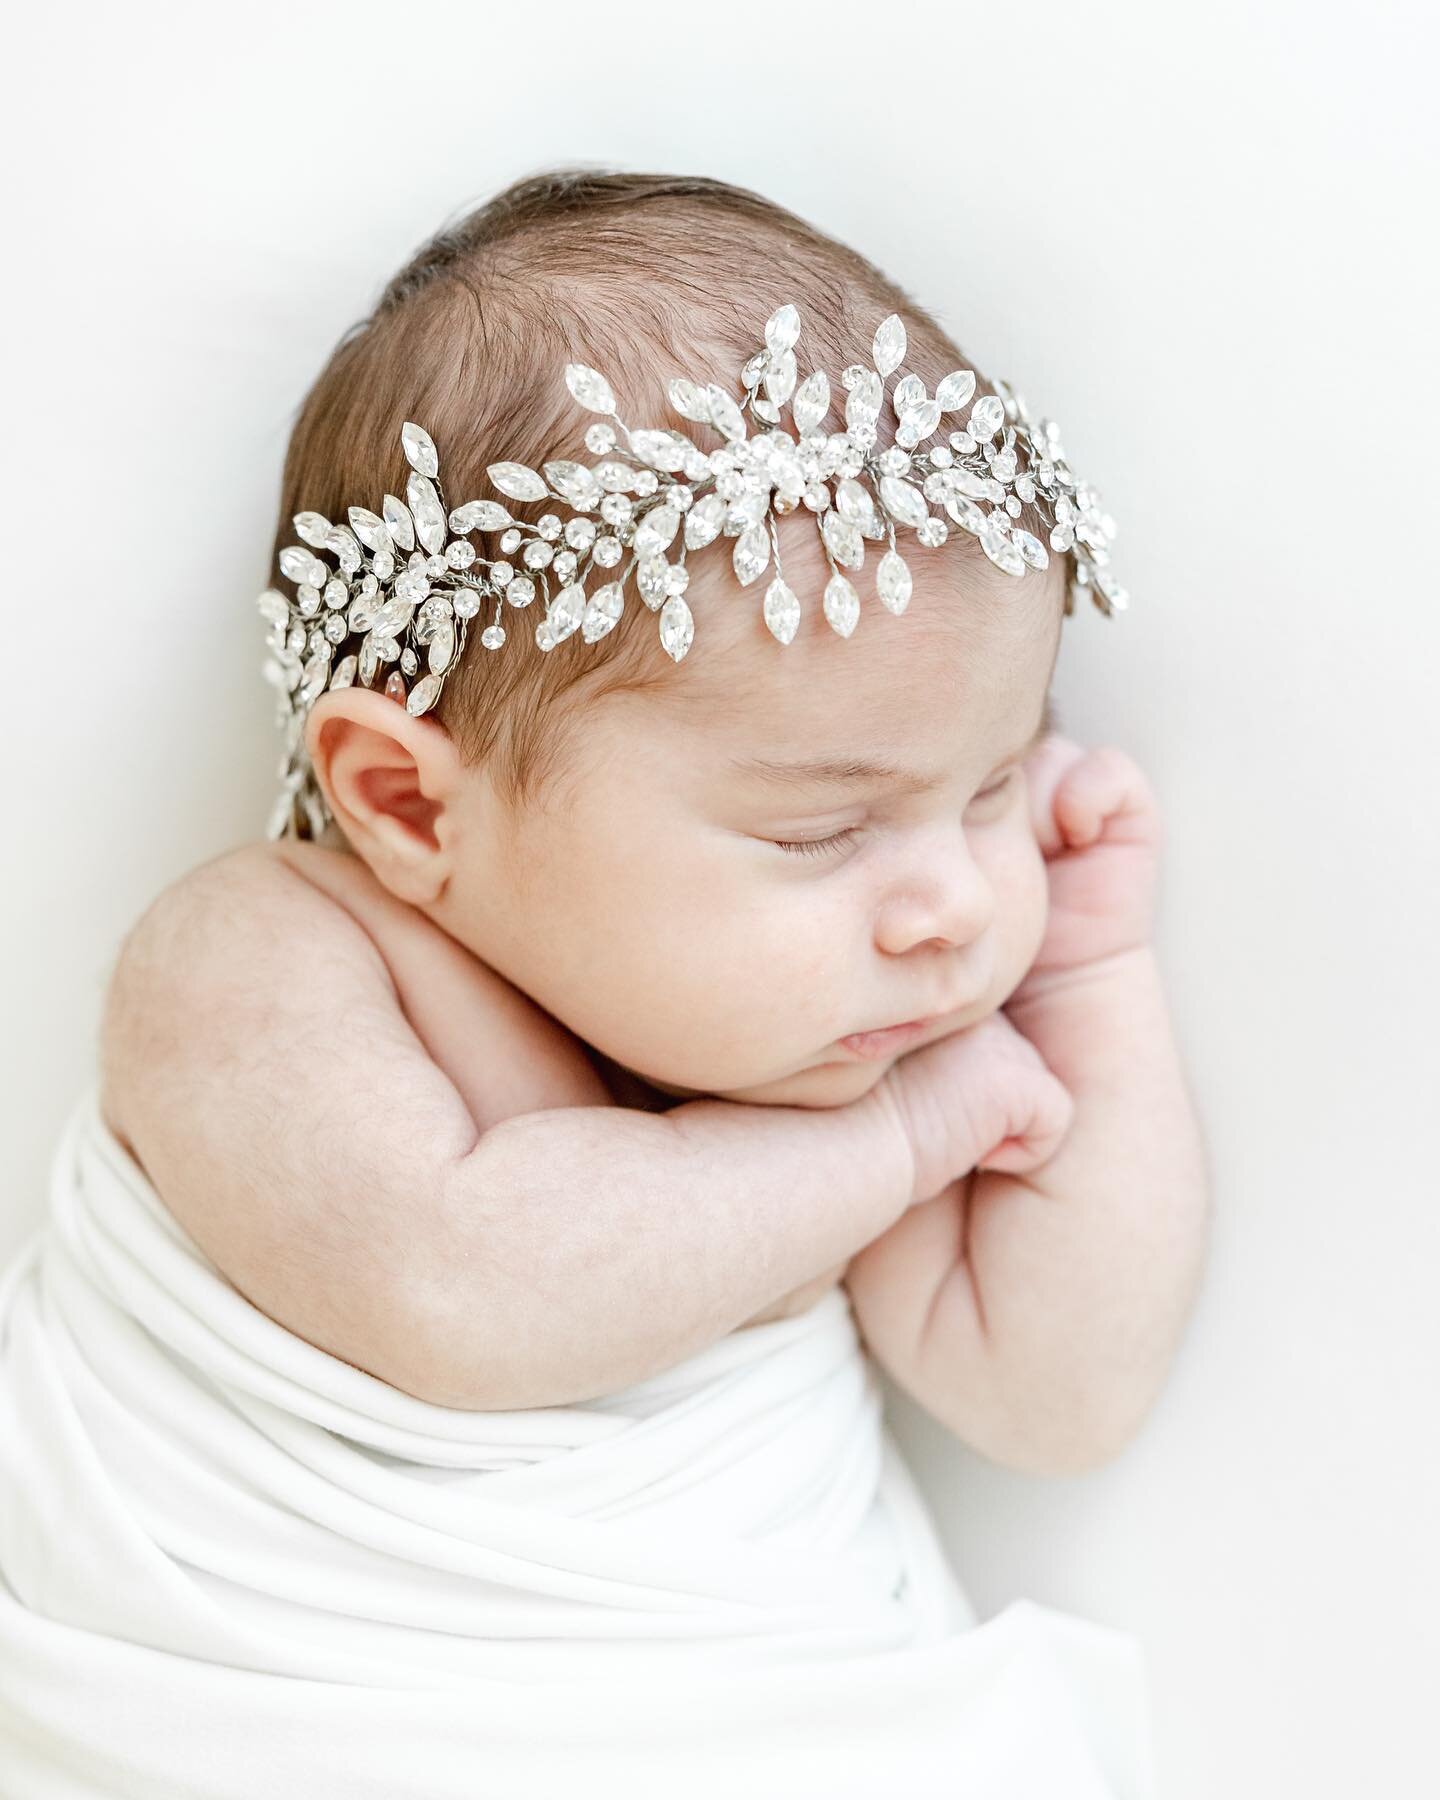 Wearing Mama&rsquo;s wedding hair piece  I love that Mama wanted to incorporate this beautiful, special heirloom into her newborn session.

#connecticutnewbornphotographer #ctbabyphotographer #connecticutbabyphotographer #newbornphotographerct #nyn